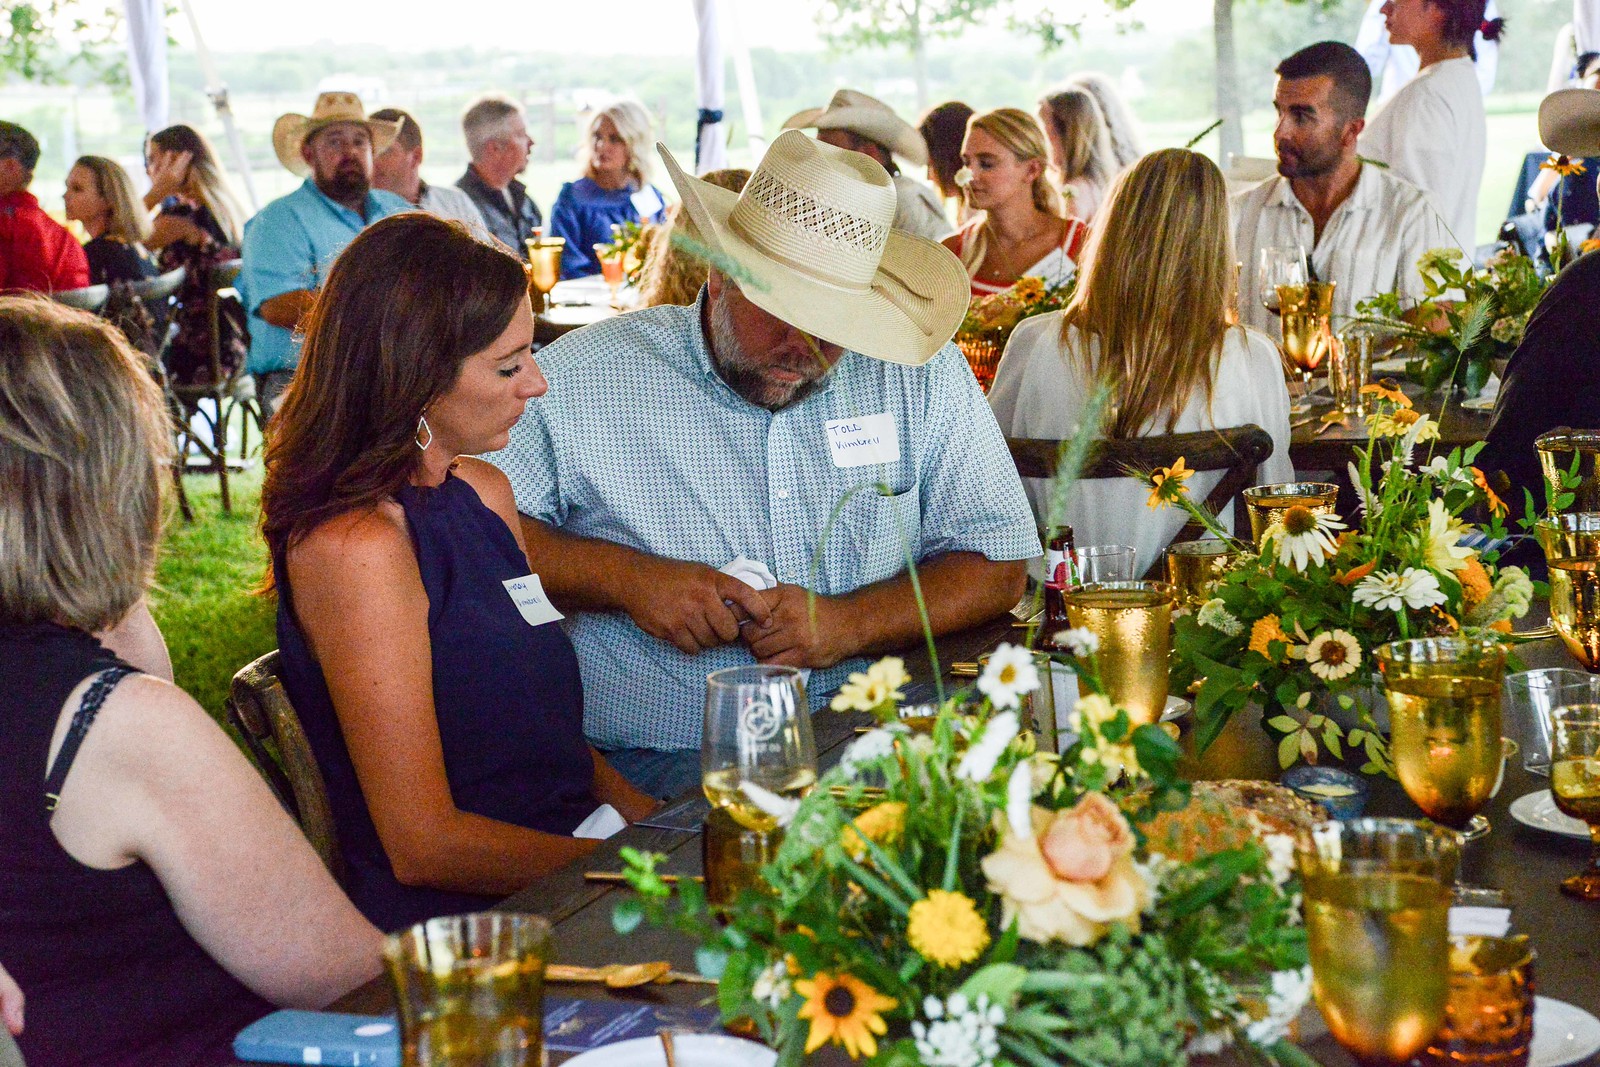 field to fork at schronk family farm